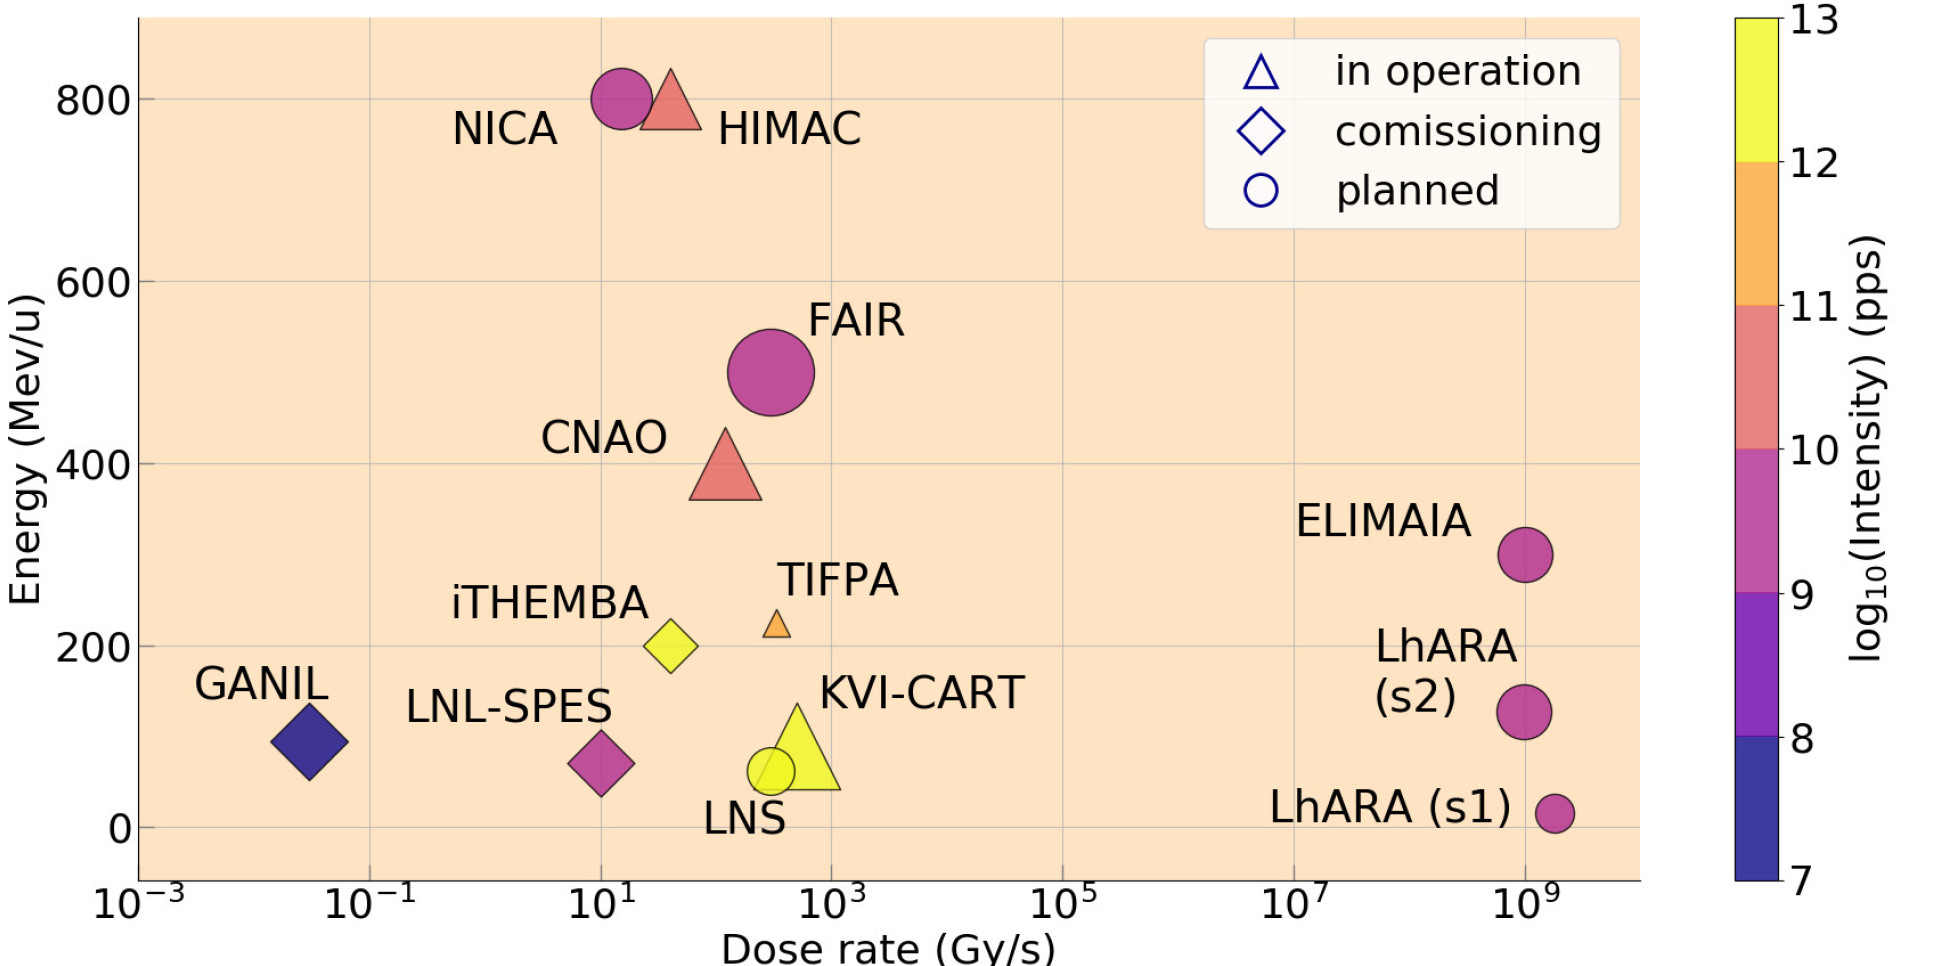 A plot of the performance of LhARA in comparison to other existing or planned facilities used for the study of radiobioloigy.  The beam energy is plotted as a function of the maximum instantaneous dose rate.  LhARA's performance exceeds that of conventionall sources and is comparable to that provided by ELIMAIA.